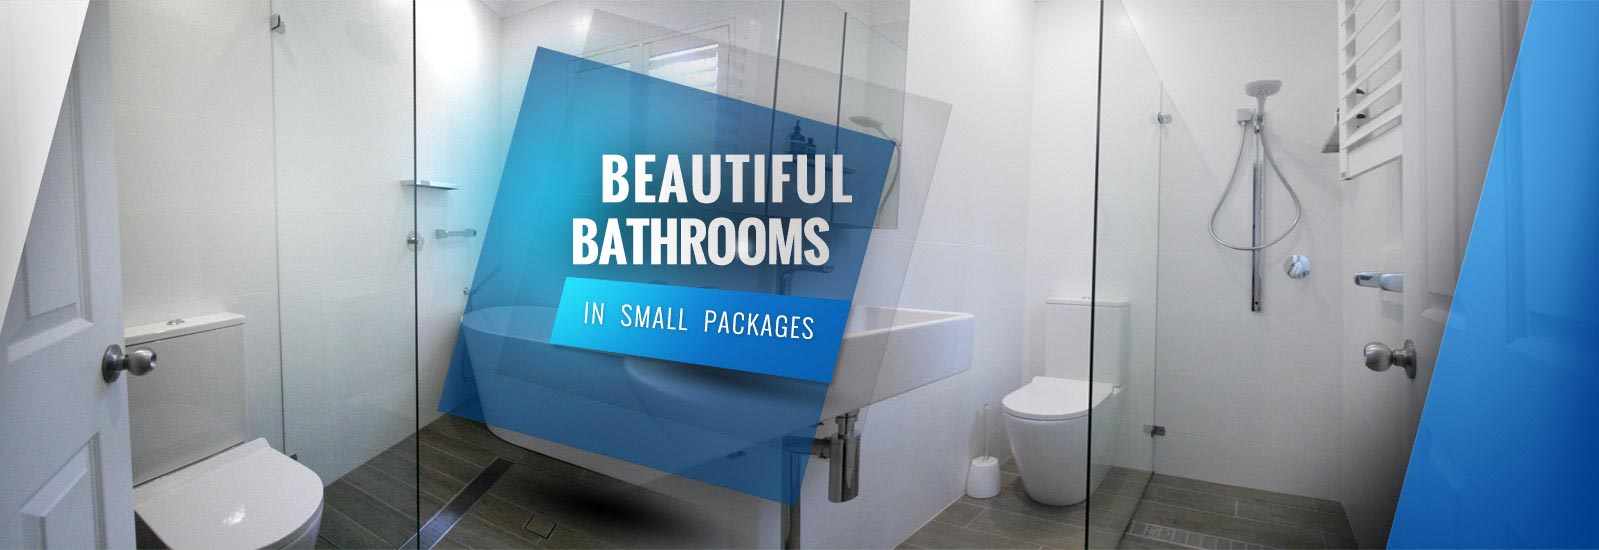 Beautiful Bathrooms in small packages